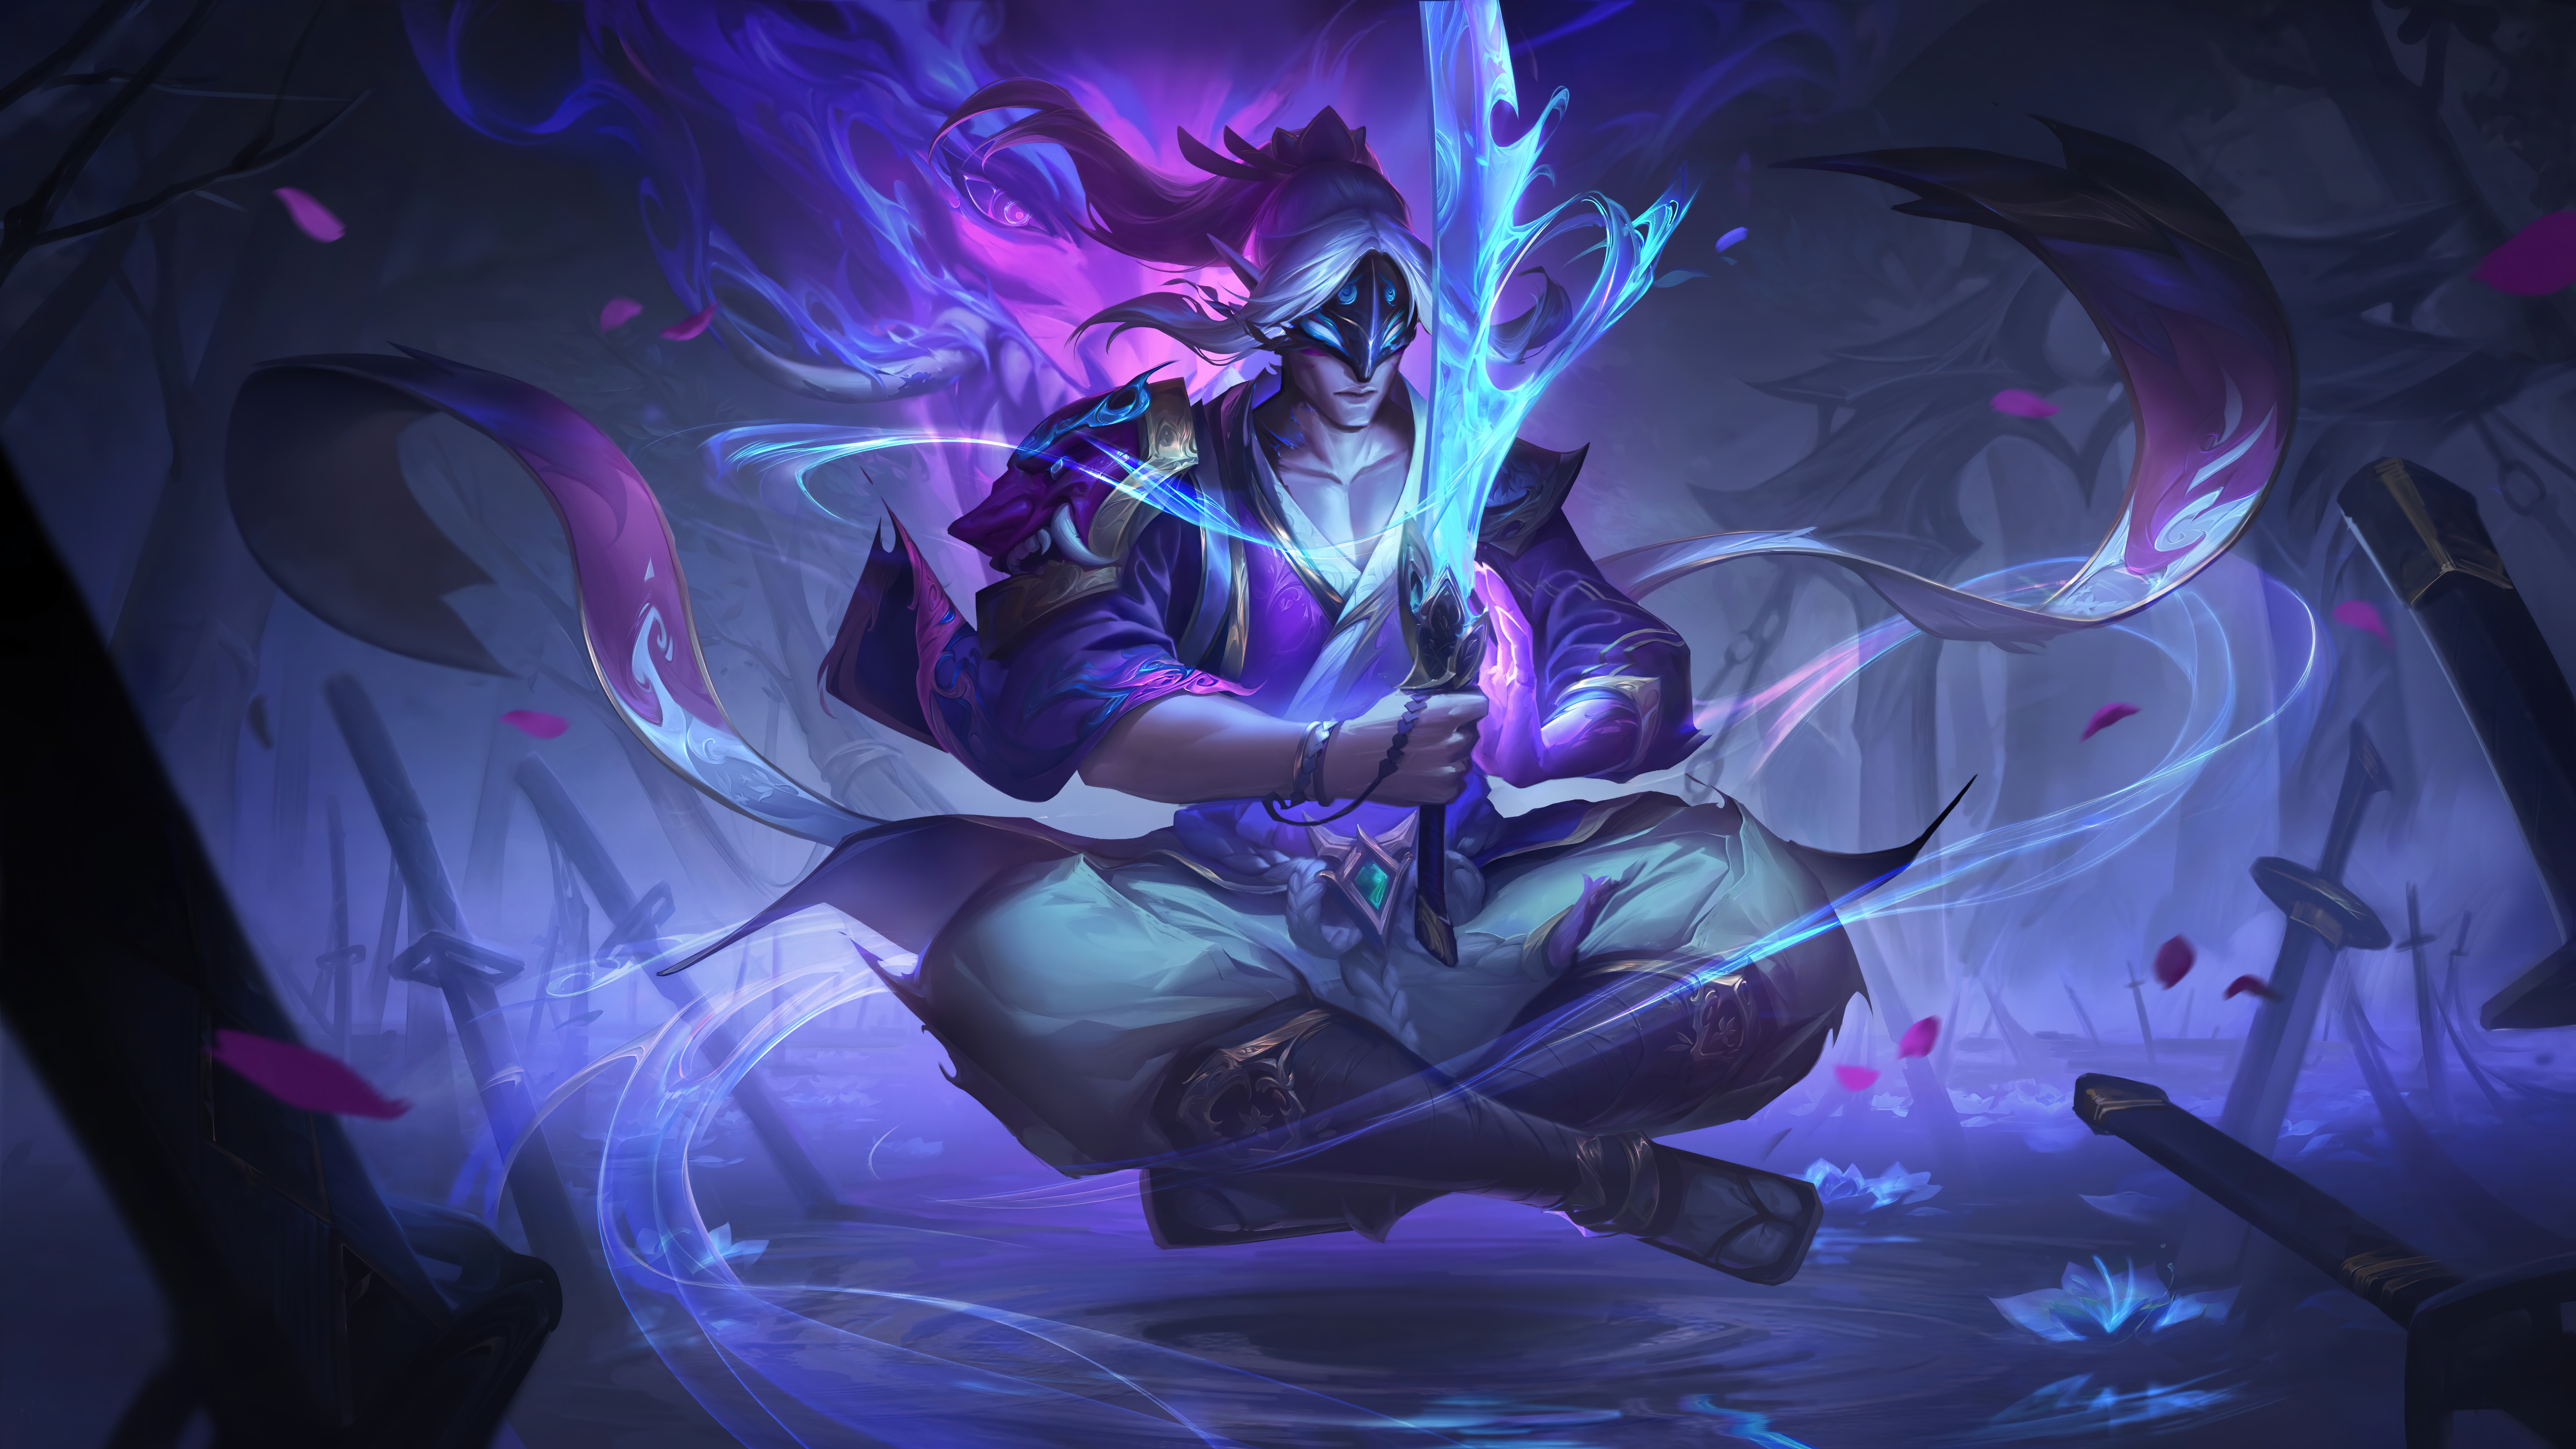 General 7680x4320 Master Yi (League of Legends) Spirit Blossom (League of Legends) League of Legends digital art Riot Games GZG 4K video games video game characters